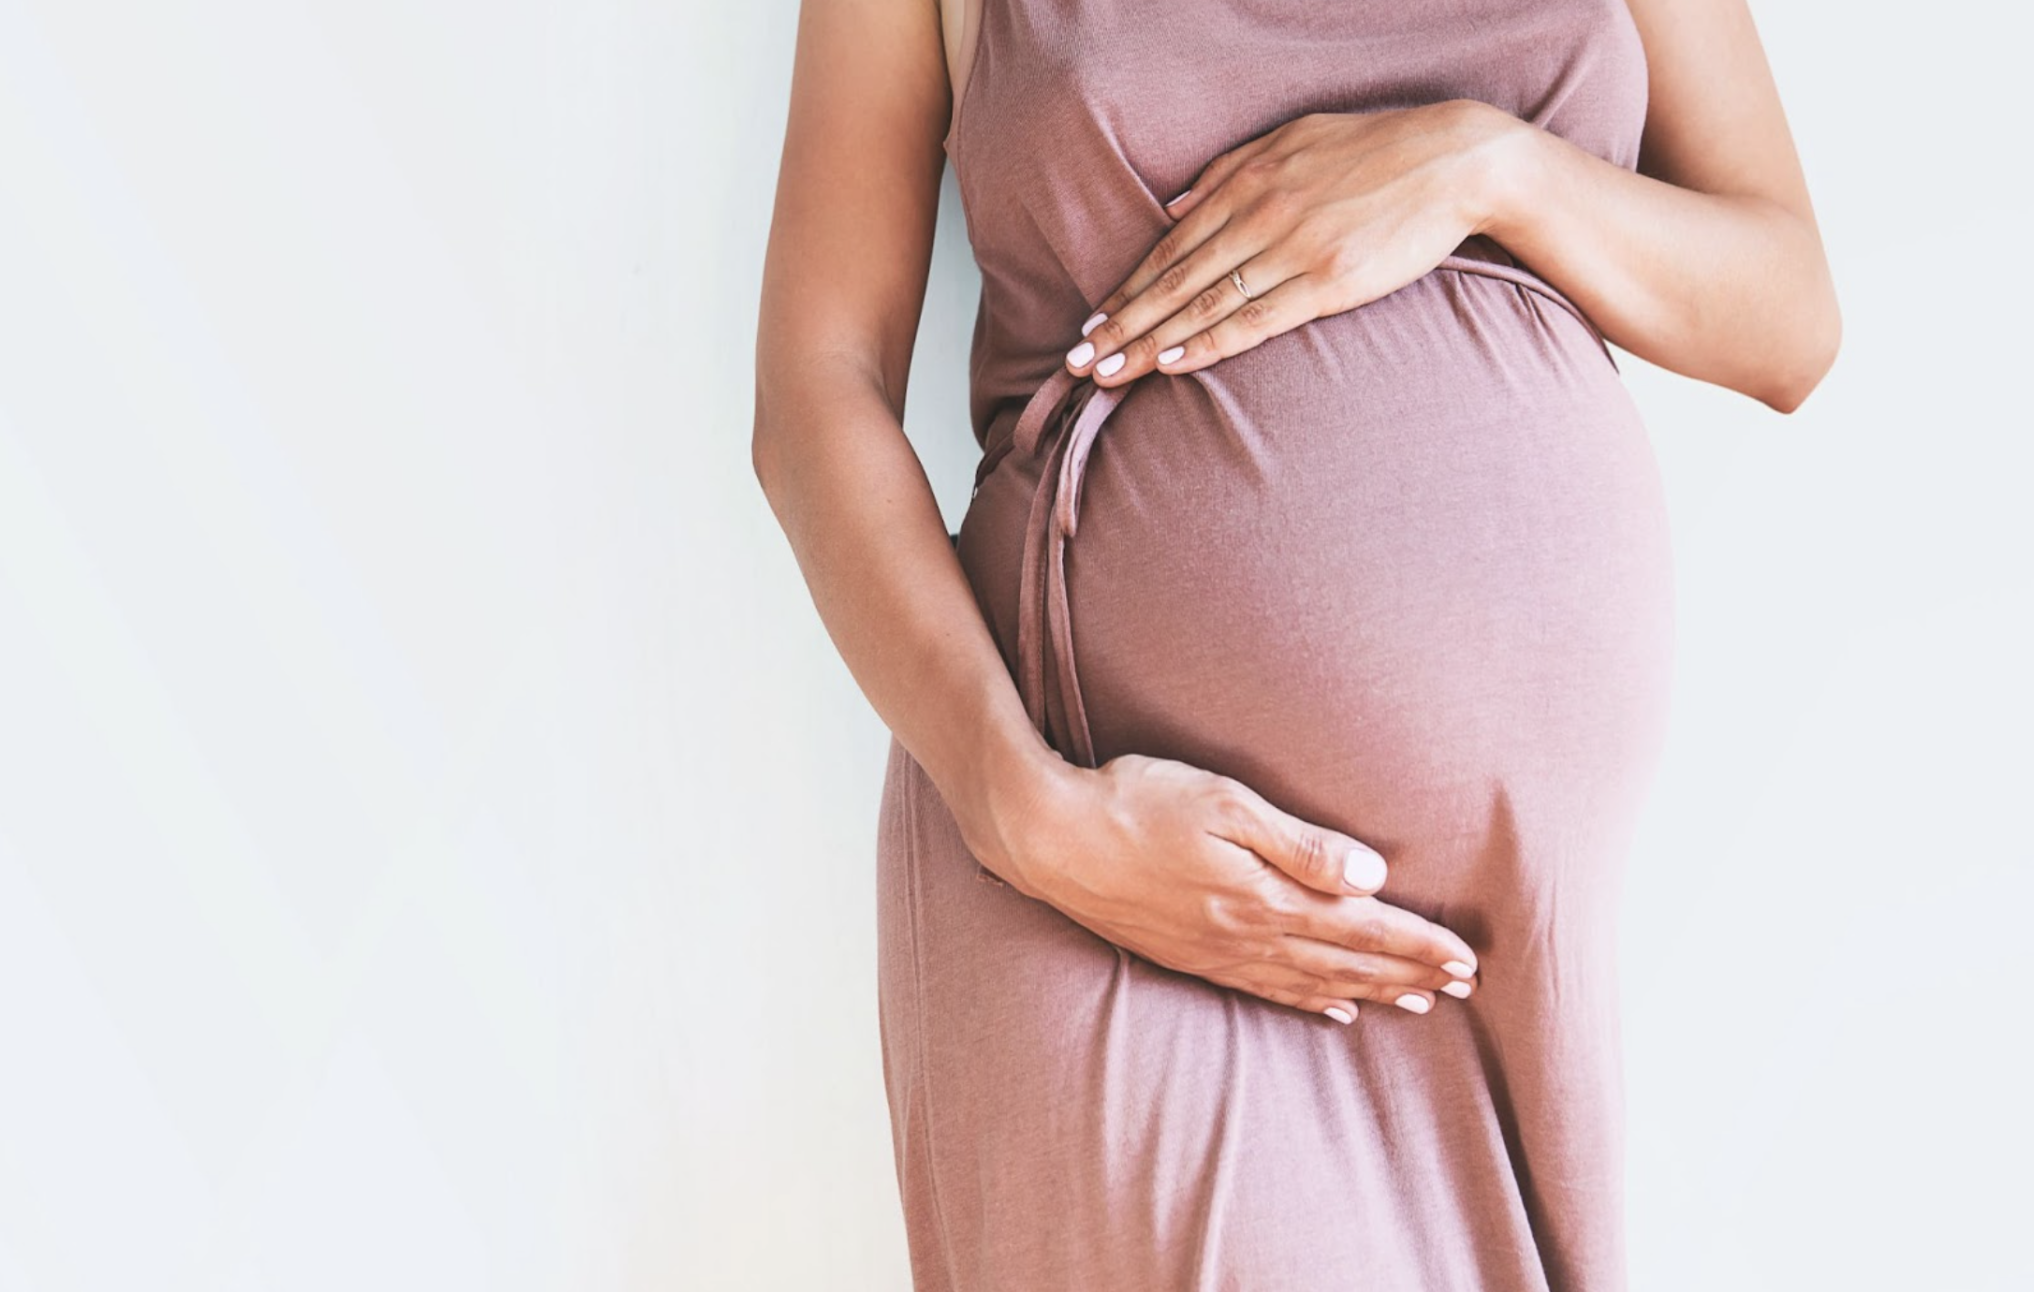 5 Things to Know about Pregnancy After Tummy Tuck Surgery